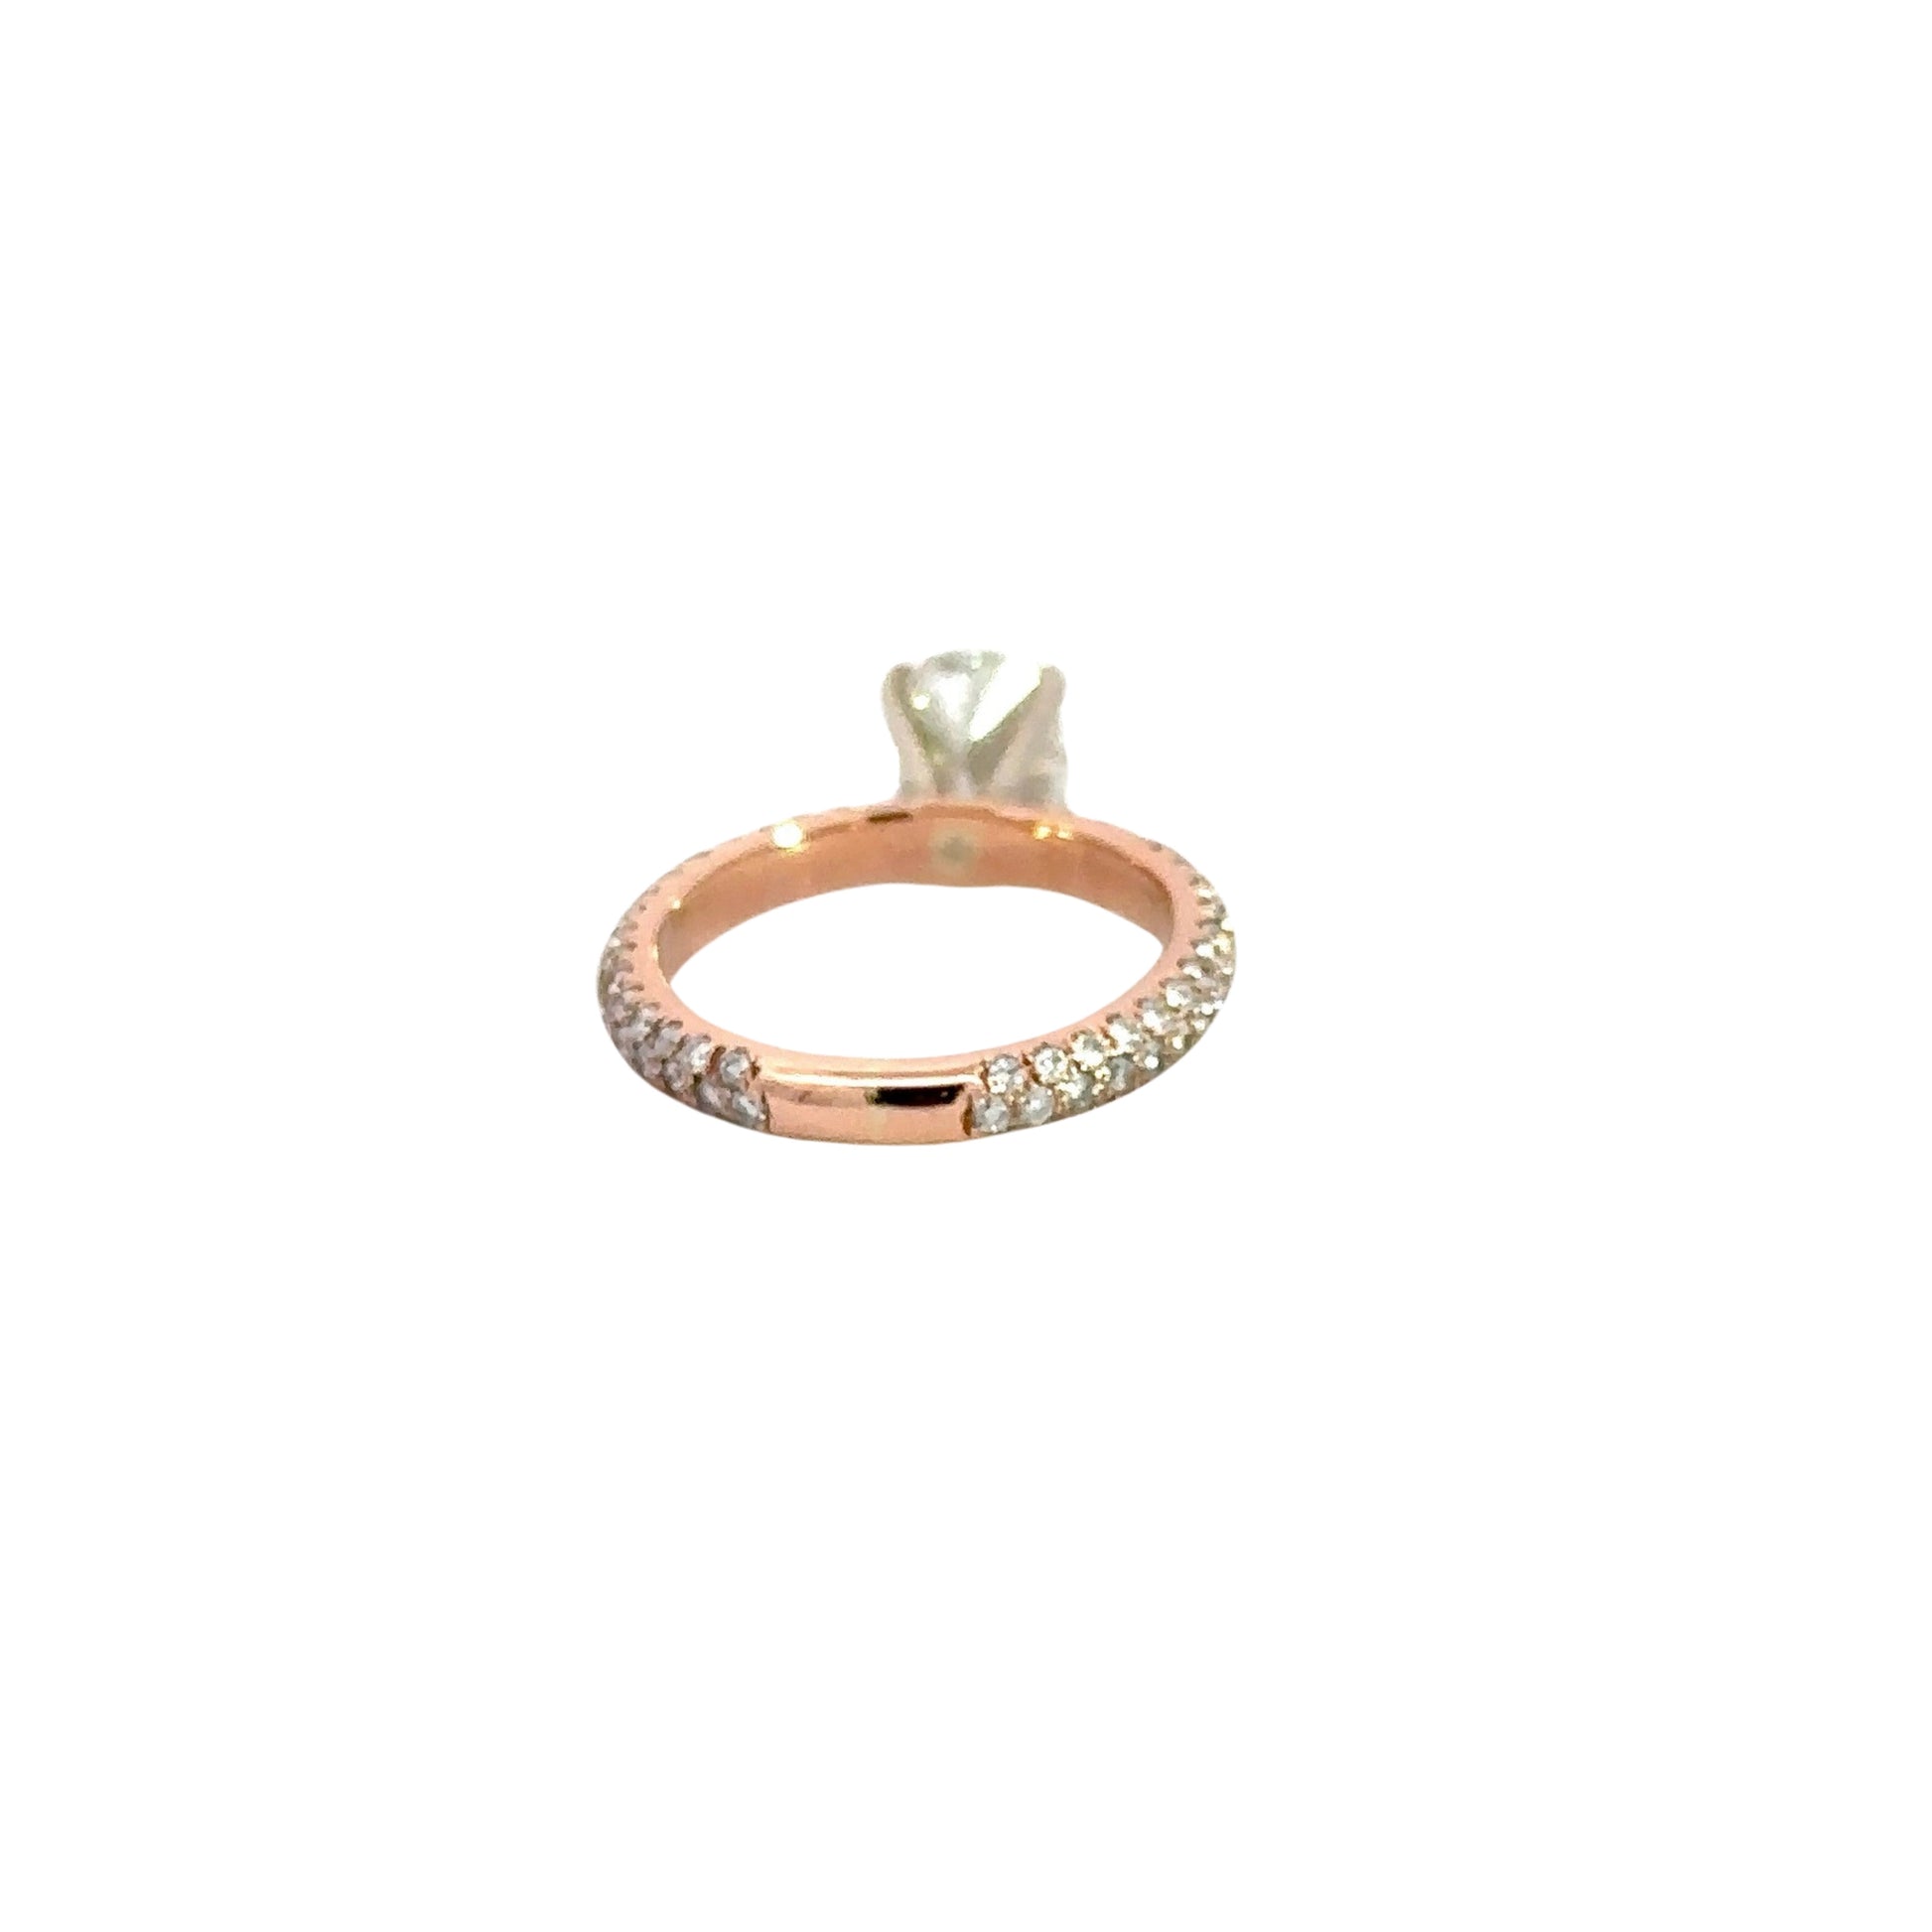 Back of rose gold ring with diamonds on the band